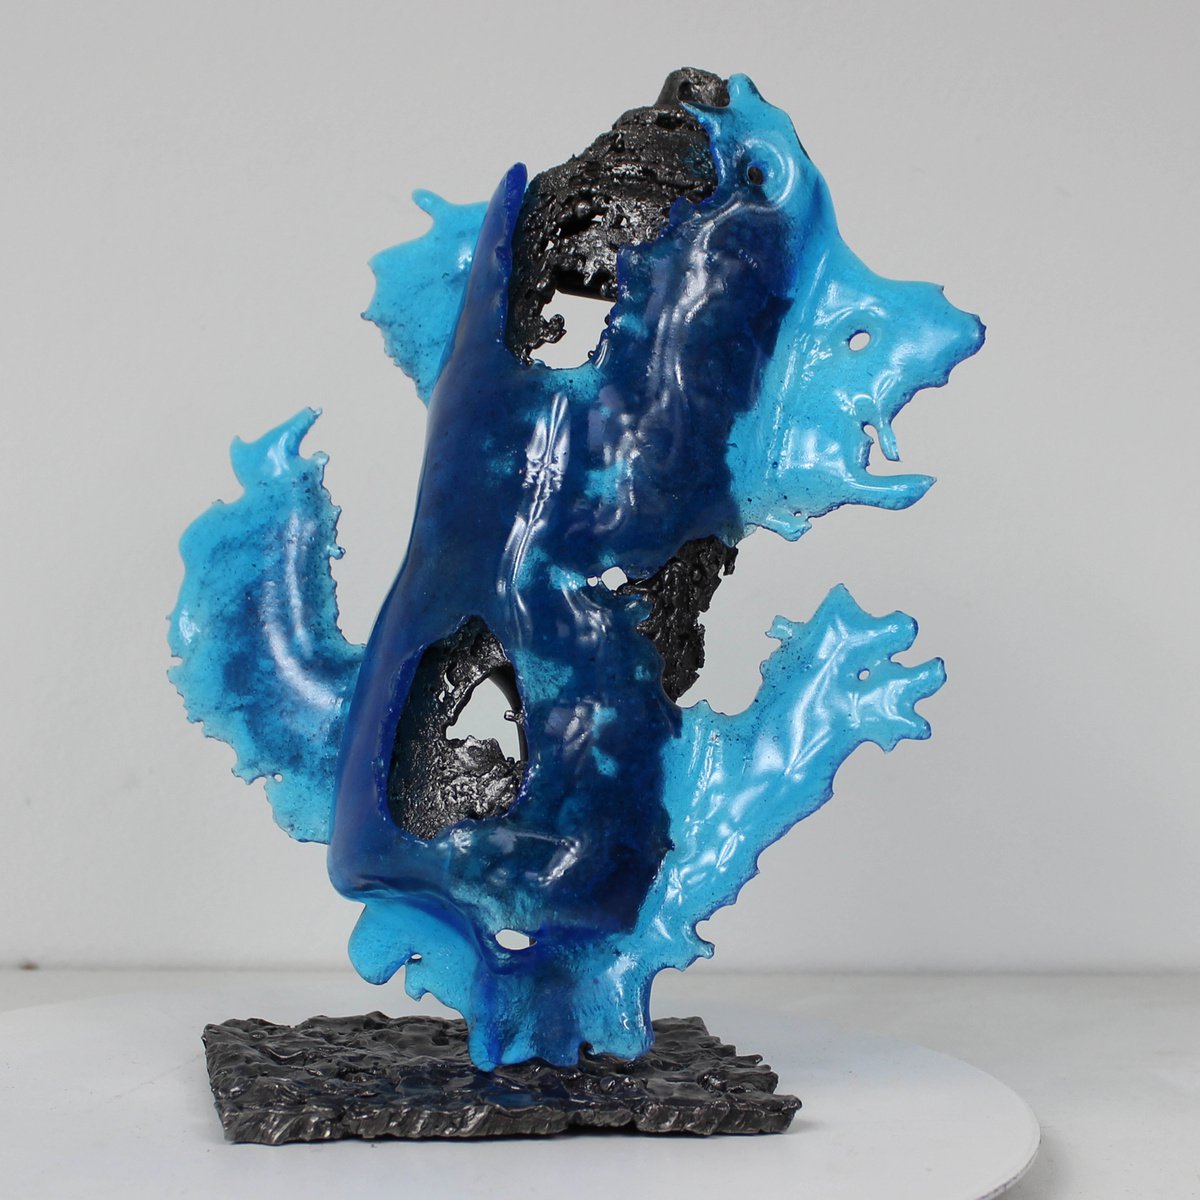 Spray can blue sea - Can spray metal and glass sculpture by Philippe Buil